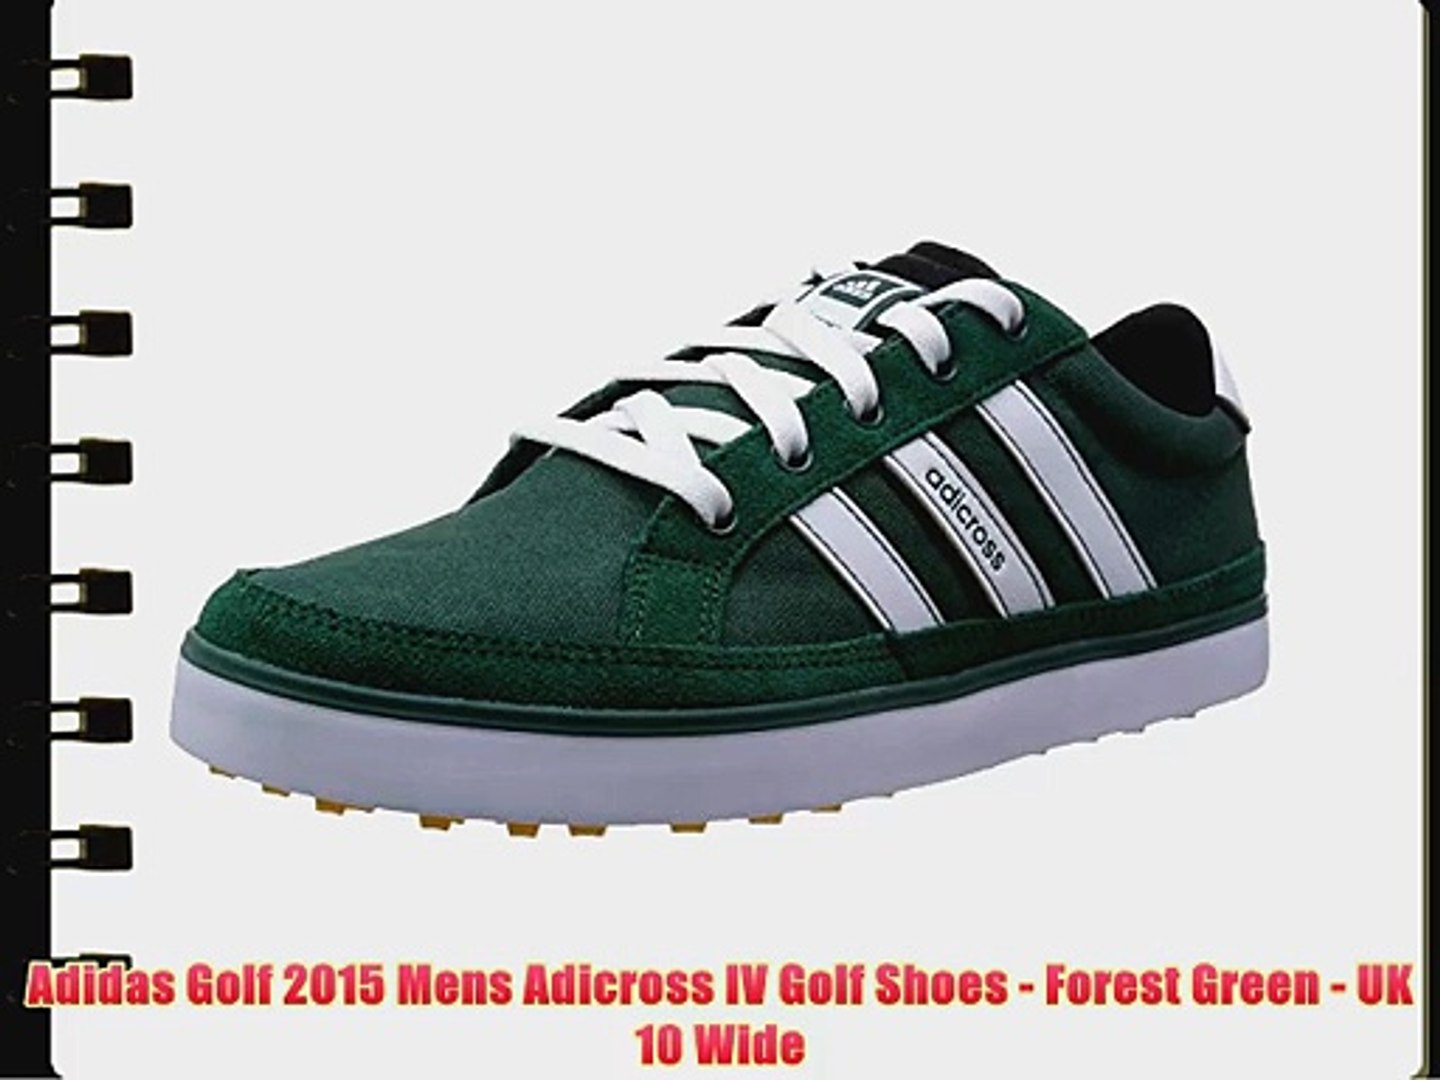 Adidas Golf 2015 Mens Adicross IV Golf Shoes - Forest Green - UK 10 Wide -  video dailymotion